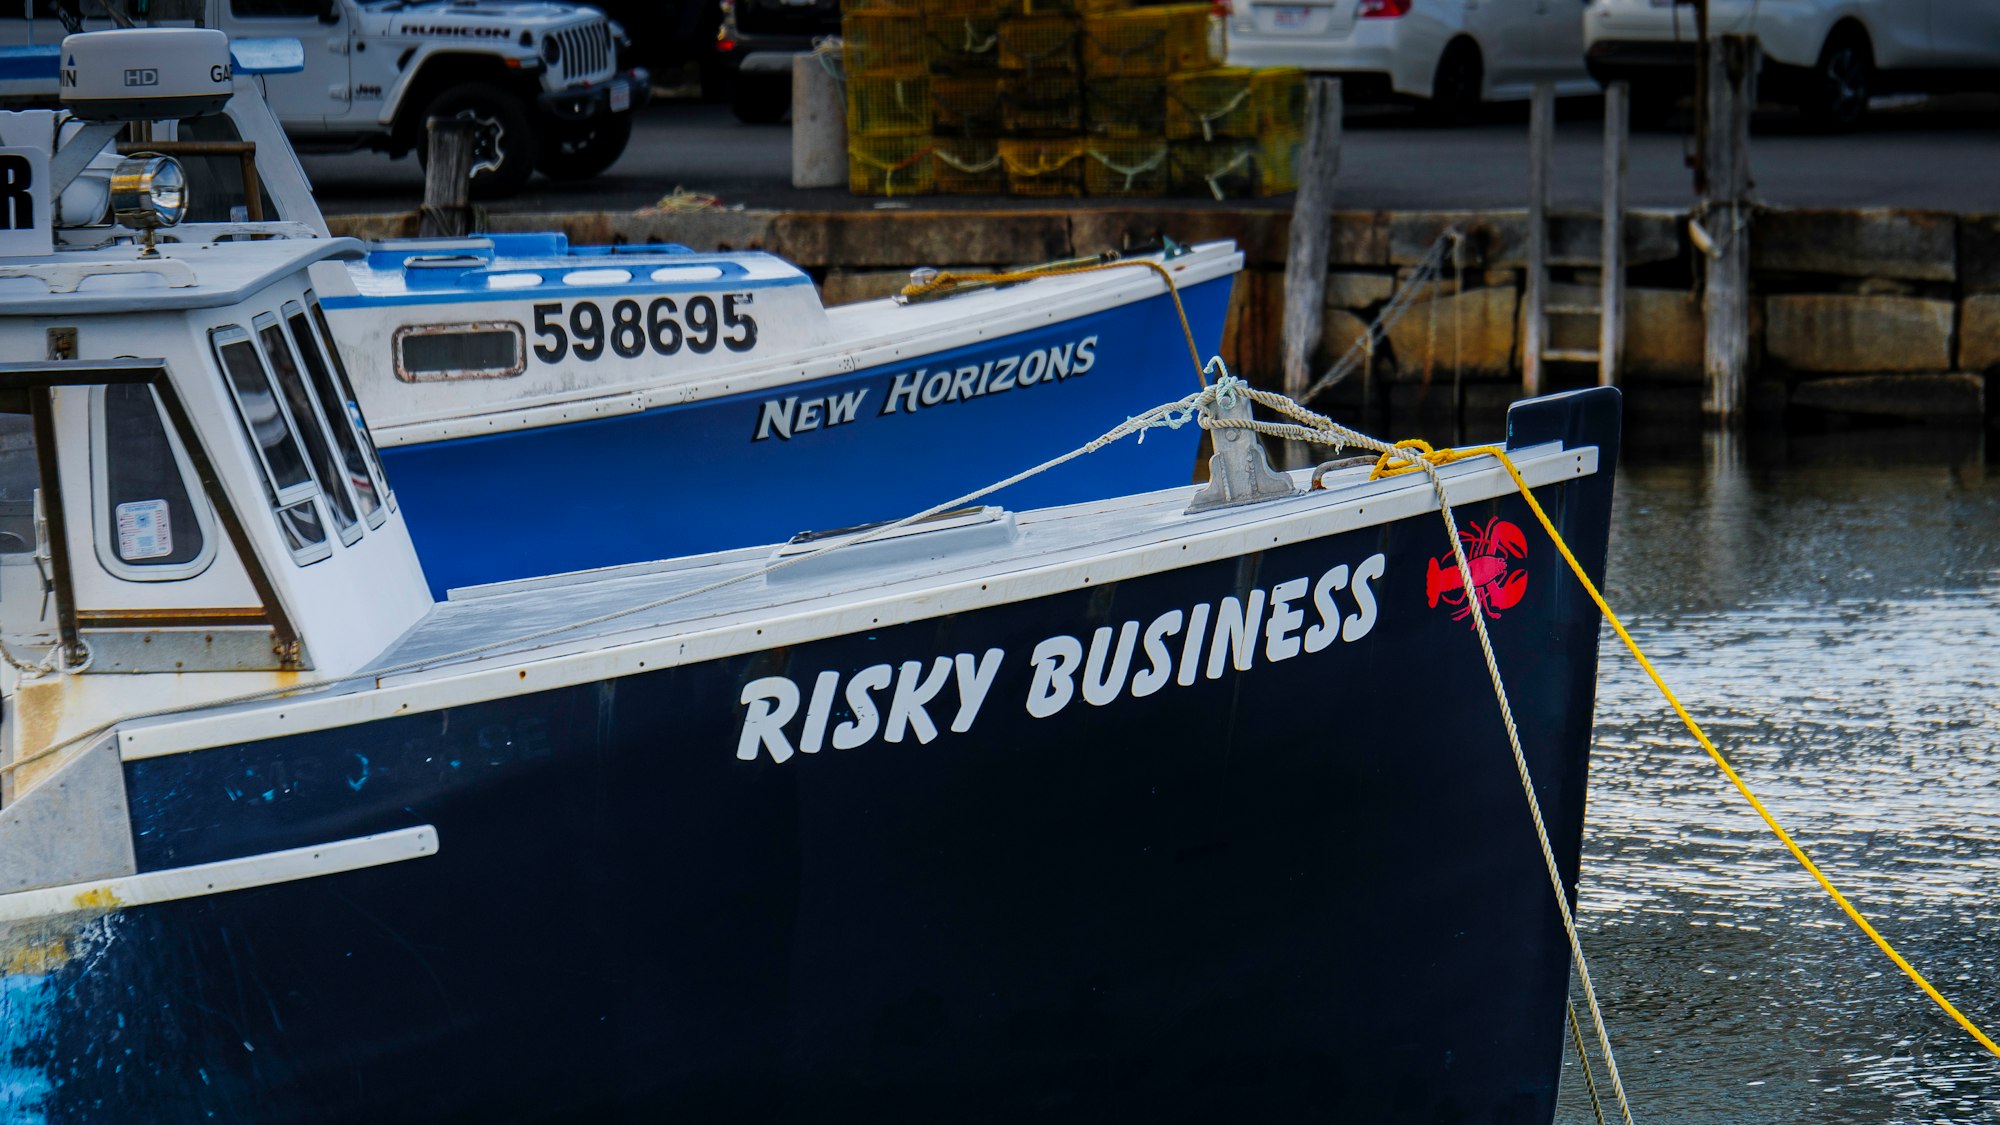 The "Risky Business" fishing vessel